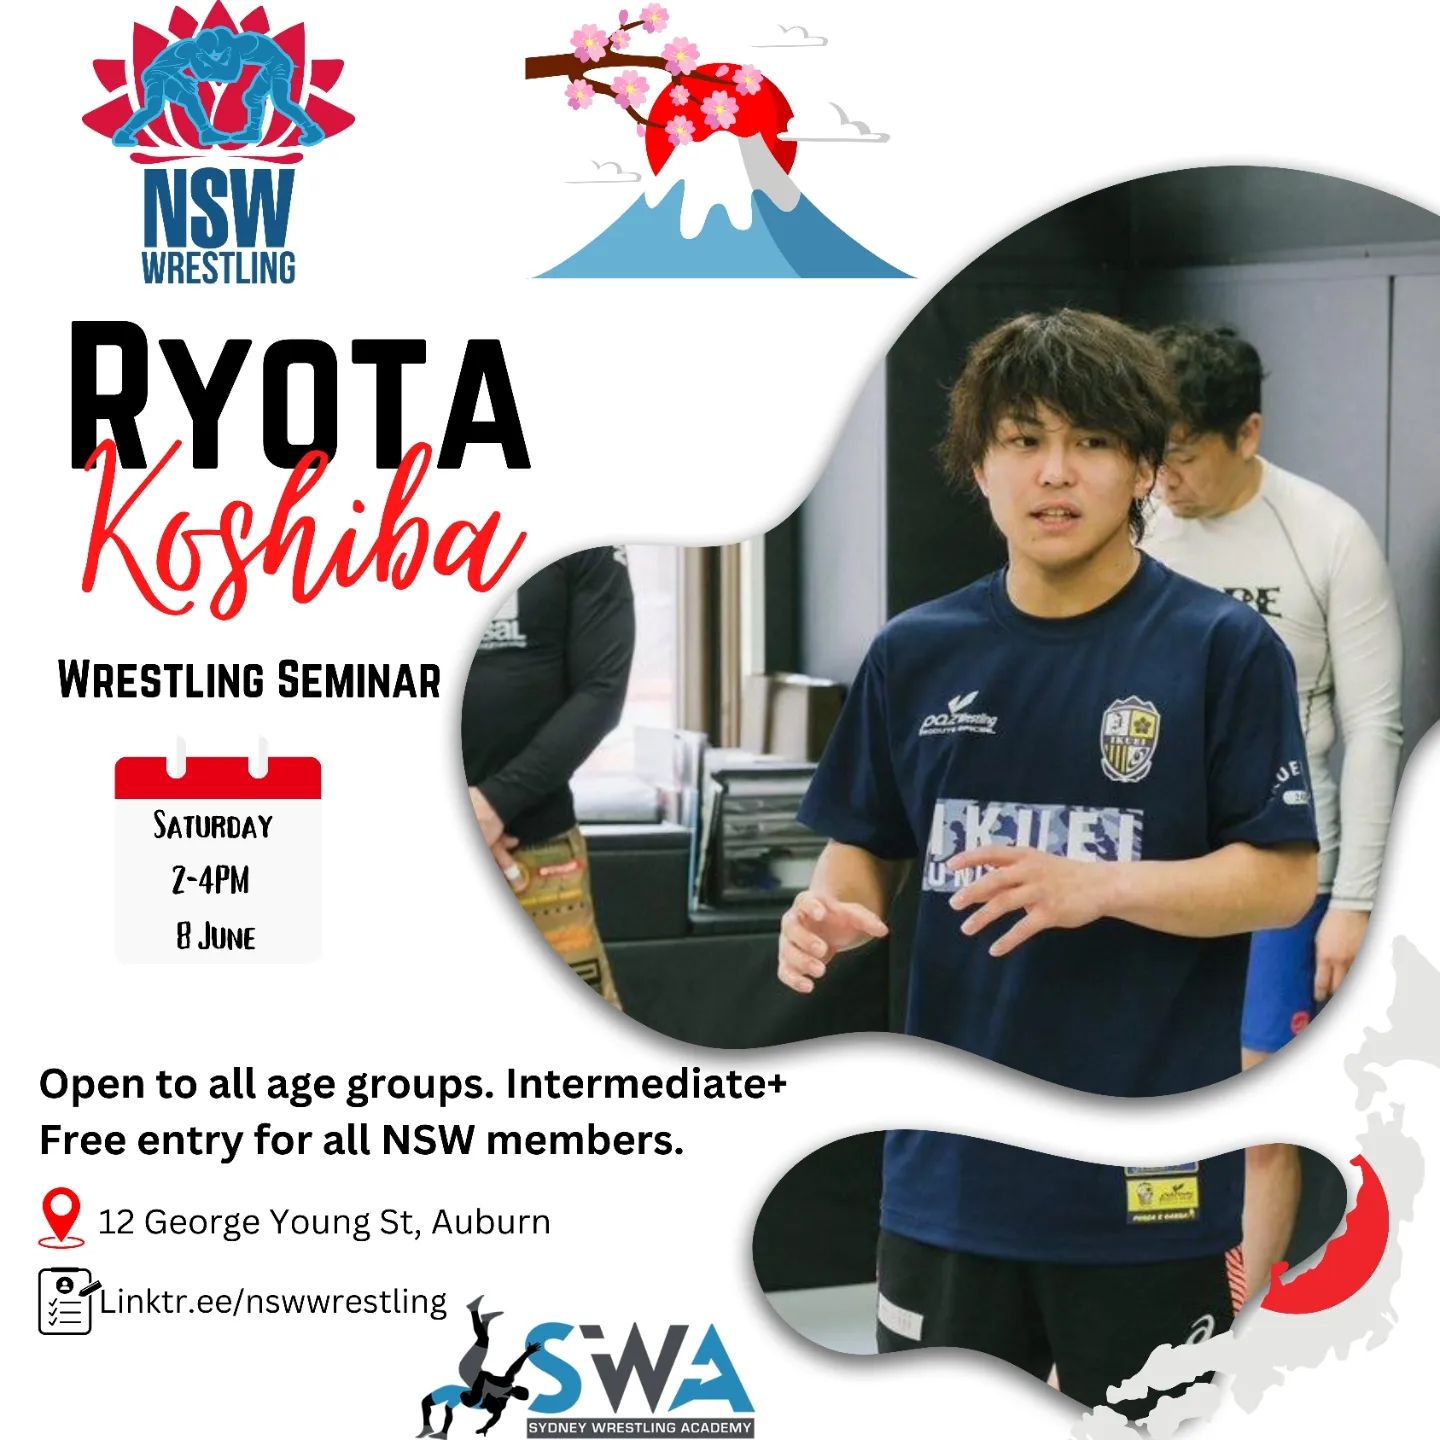 Photo shared by NSW Wrestling on June 01, 2024 tagging @wrestling.australia, @rvut2u, @sydneywrestlingacademy, and @tosu.tosu_tec.wrestling. May be an image of 3 people, poster and text that says 'NSW WRESTLING RYOTA Koshiba WRESTLING SEMINAR RE SATURDAY 2-4PM B BJUNE JUNE BTEST 山 Open to all age groups. Intermediate+ Free entry for all NSW members. 12 George Young St, Auburn E 香 -Linktr.ee/nswwrestling ee/nsww Linktr.ee/nswwrest SWA 0A SYONYWFESTUR'.